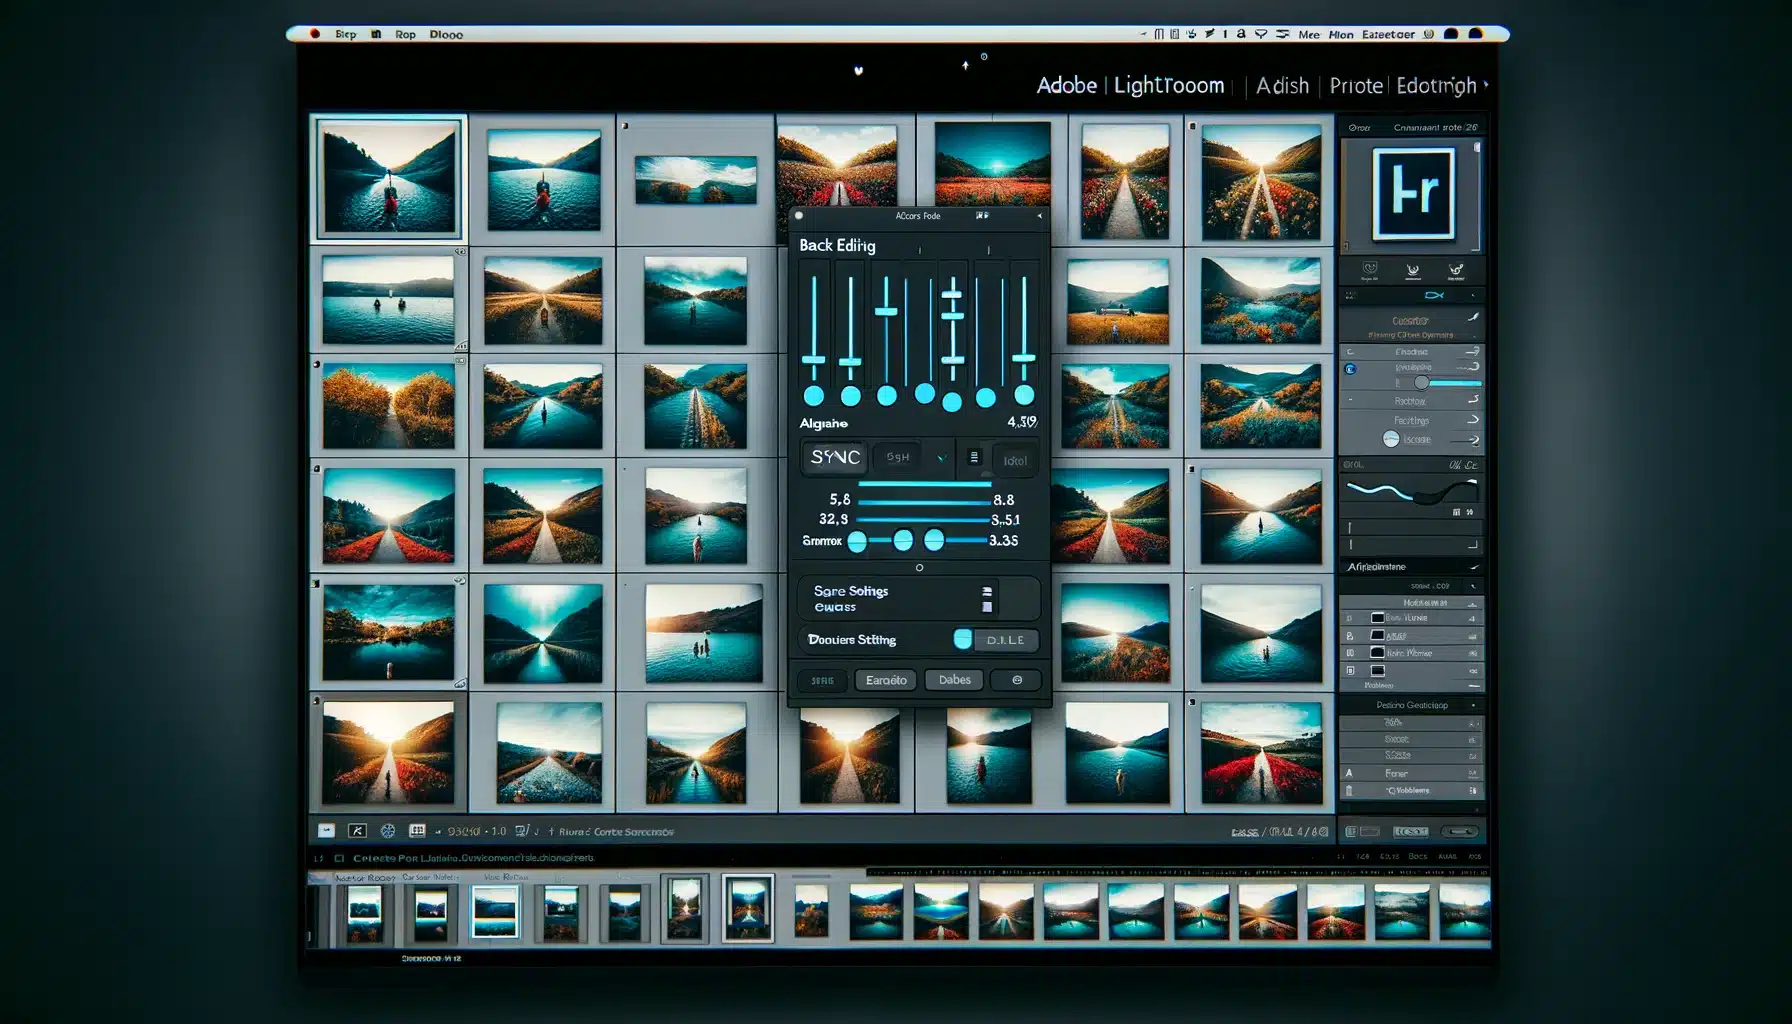 Adobe Lightroom interface showcasing batch editing with multiple image thumbnails and adjustment tools.